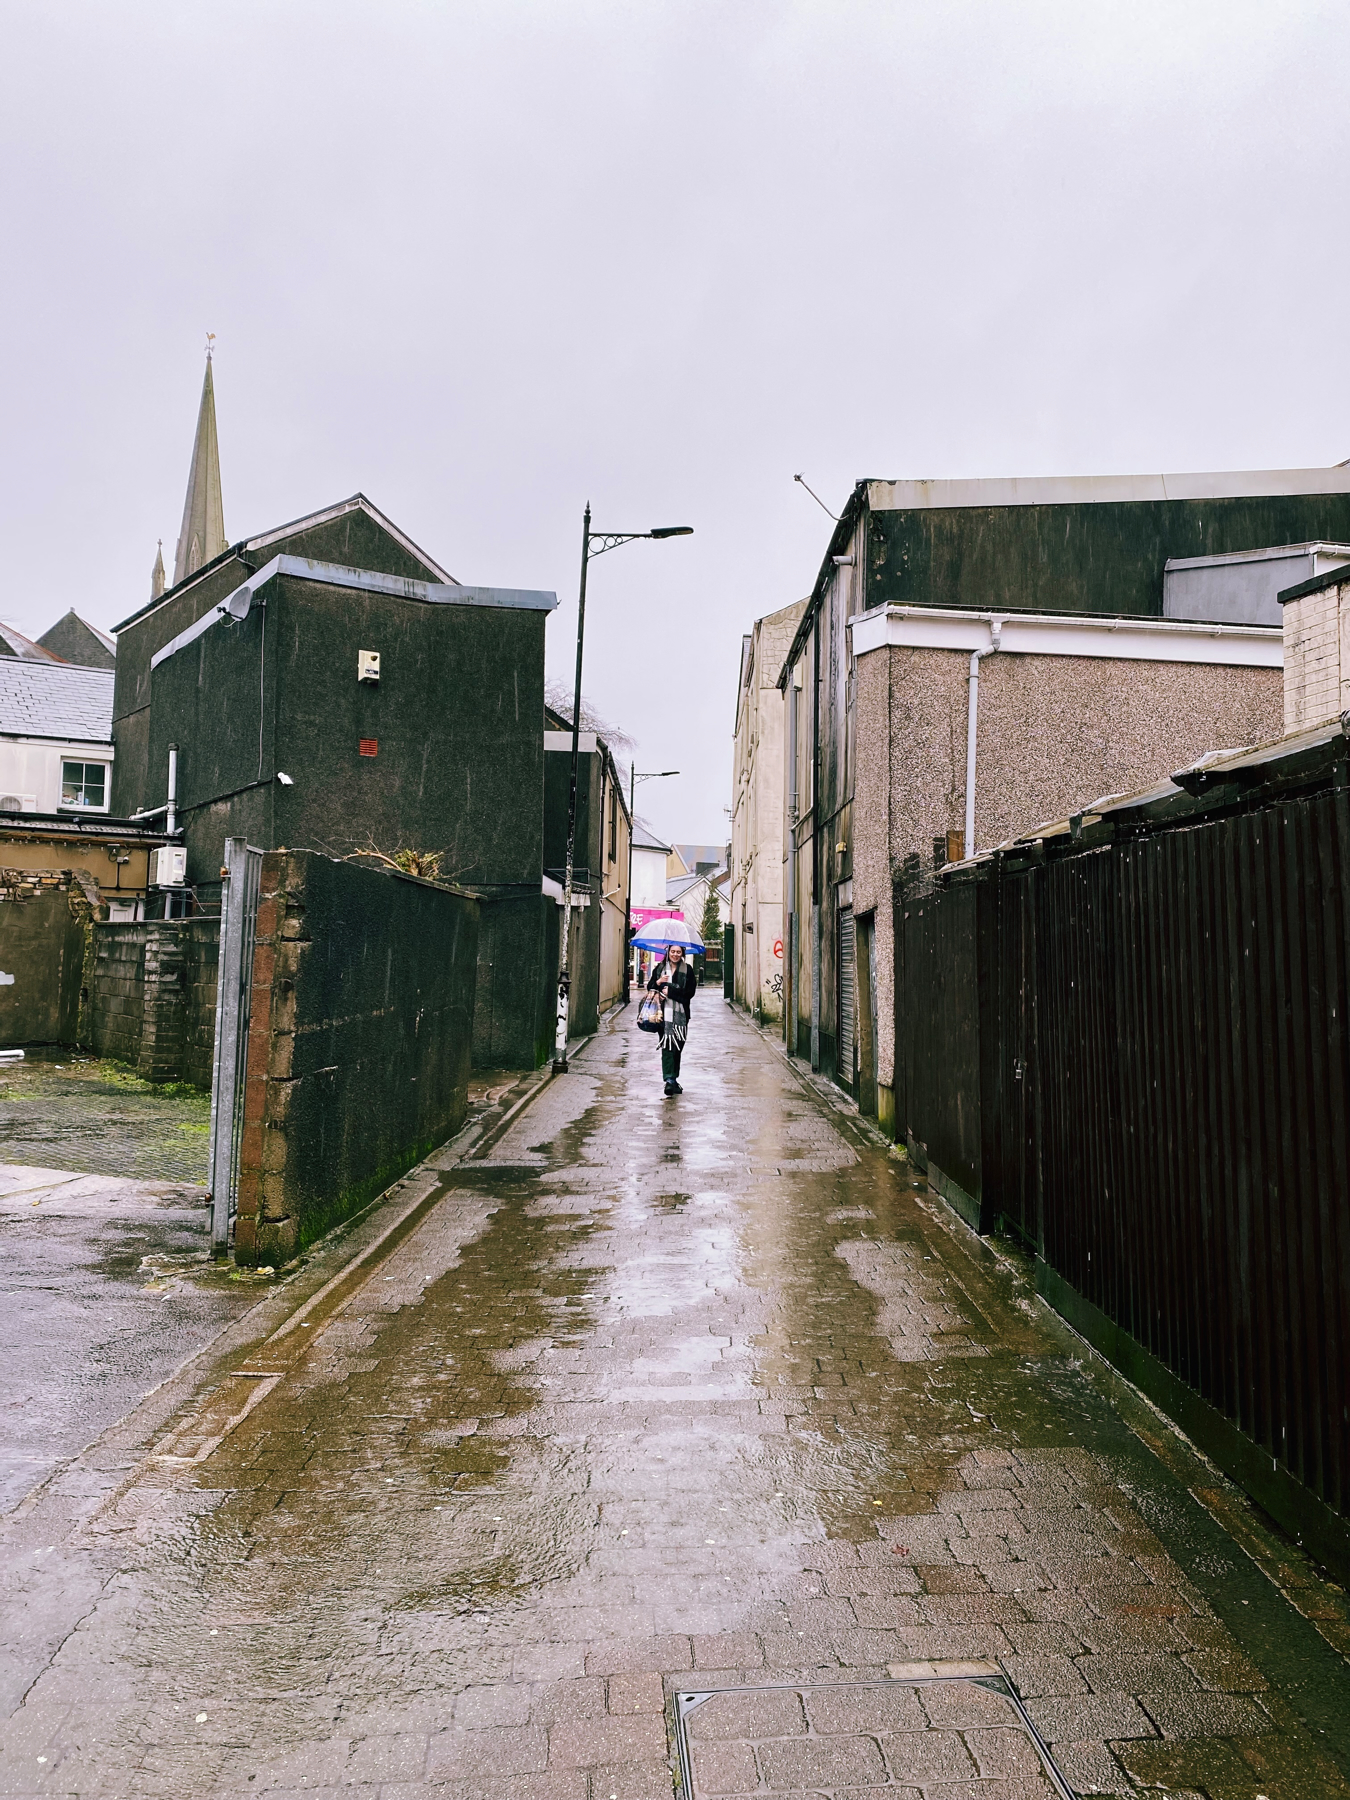 Narrow alleyway in the rain. Puddles. Woman walking with umbrella.